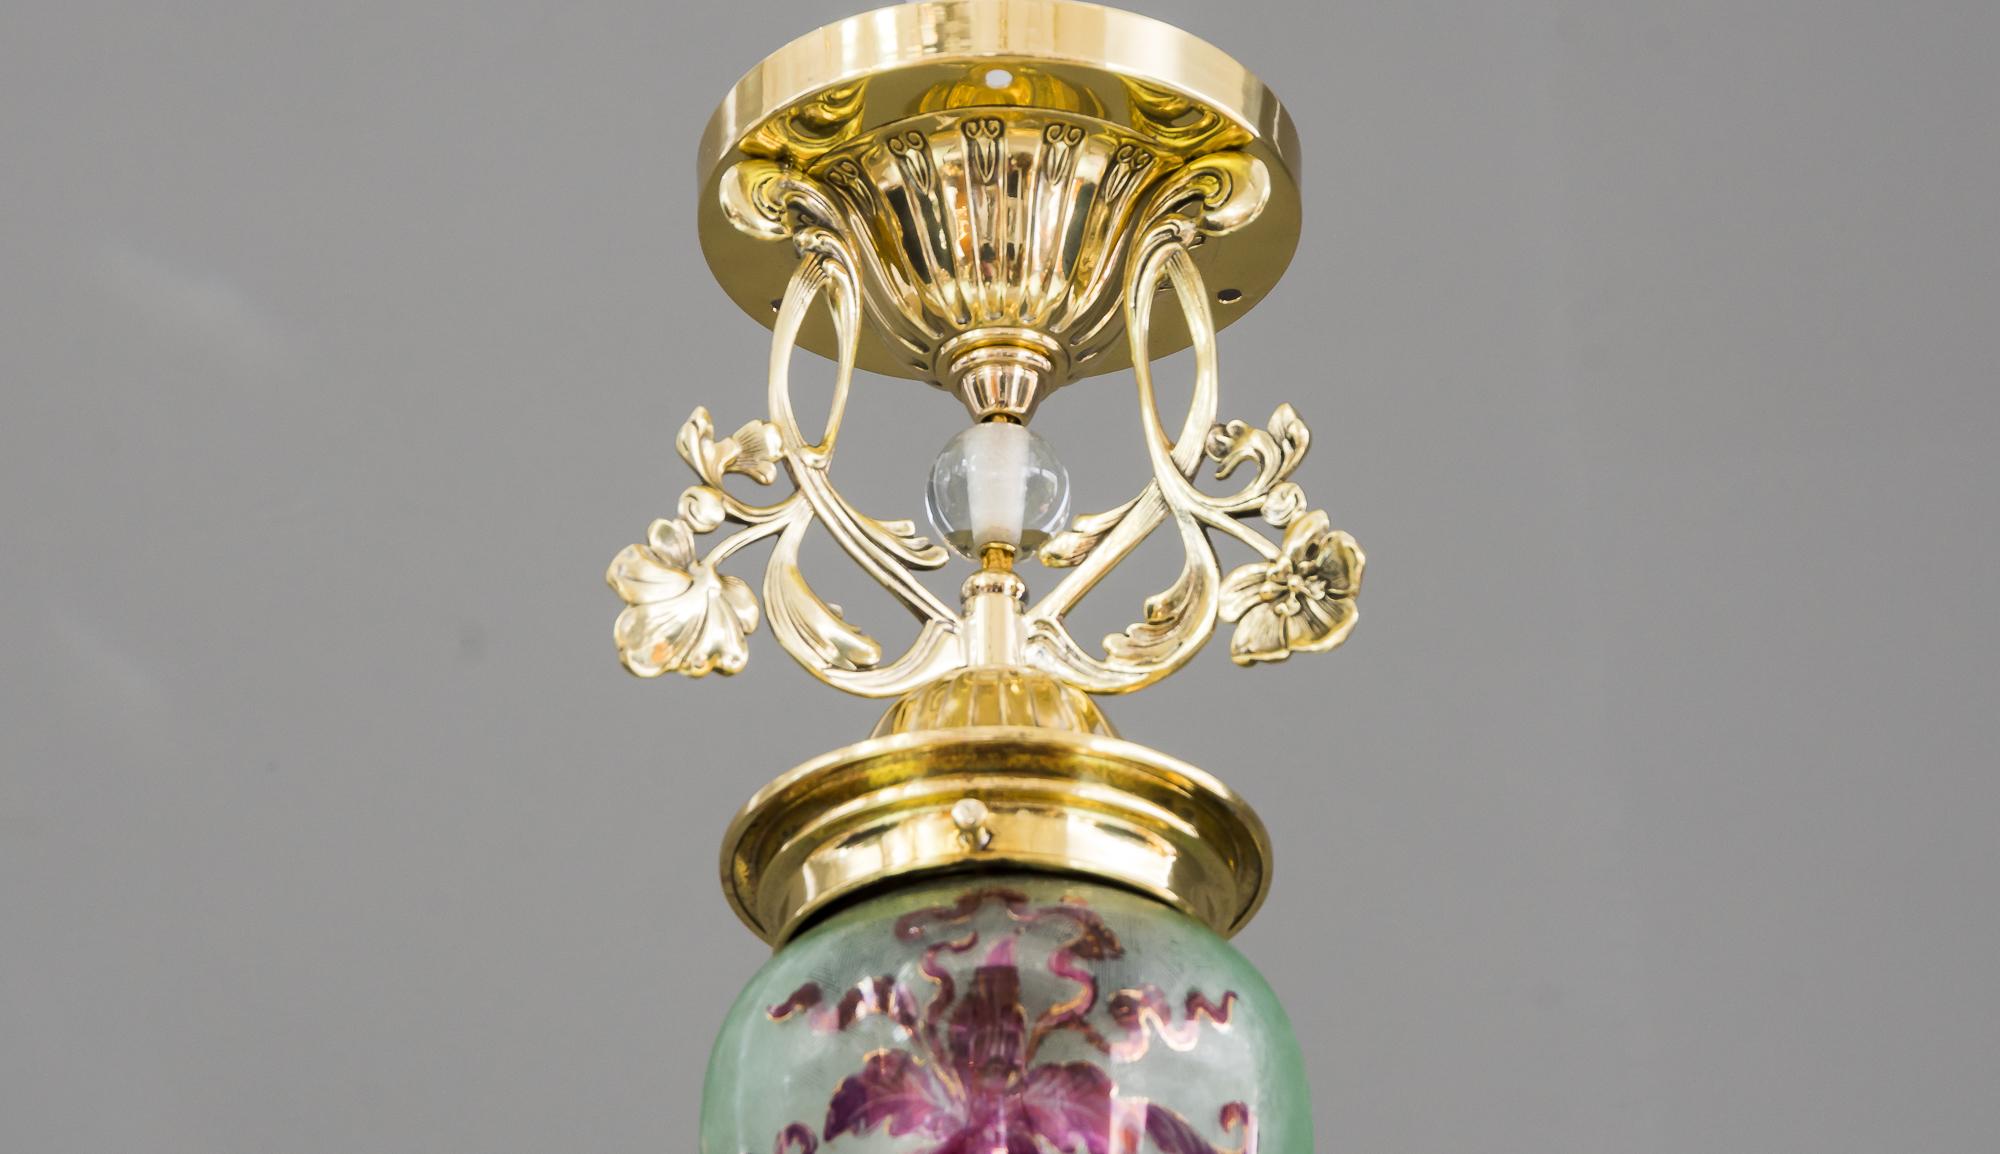 Polished Jugendstil Ceiling Lamp with Beautiful Shade, circa 1903